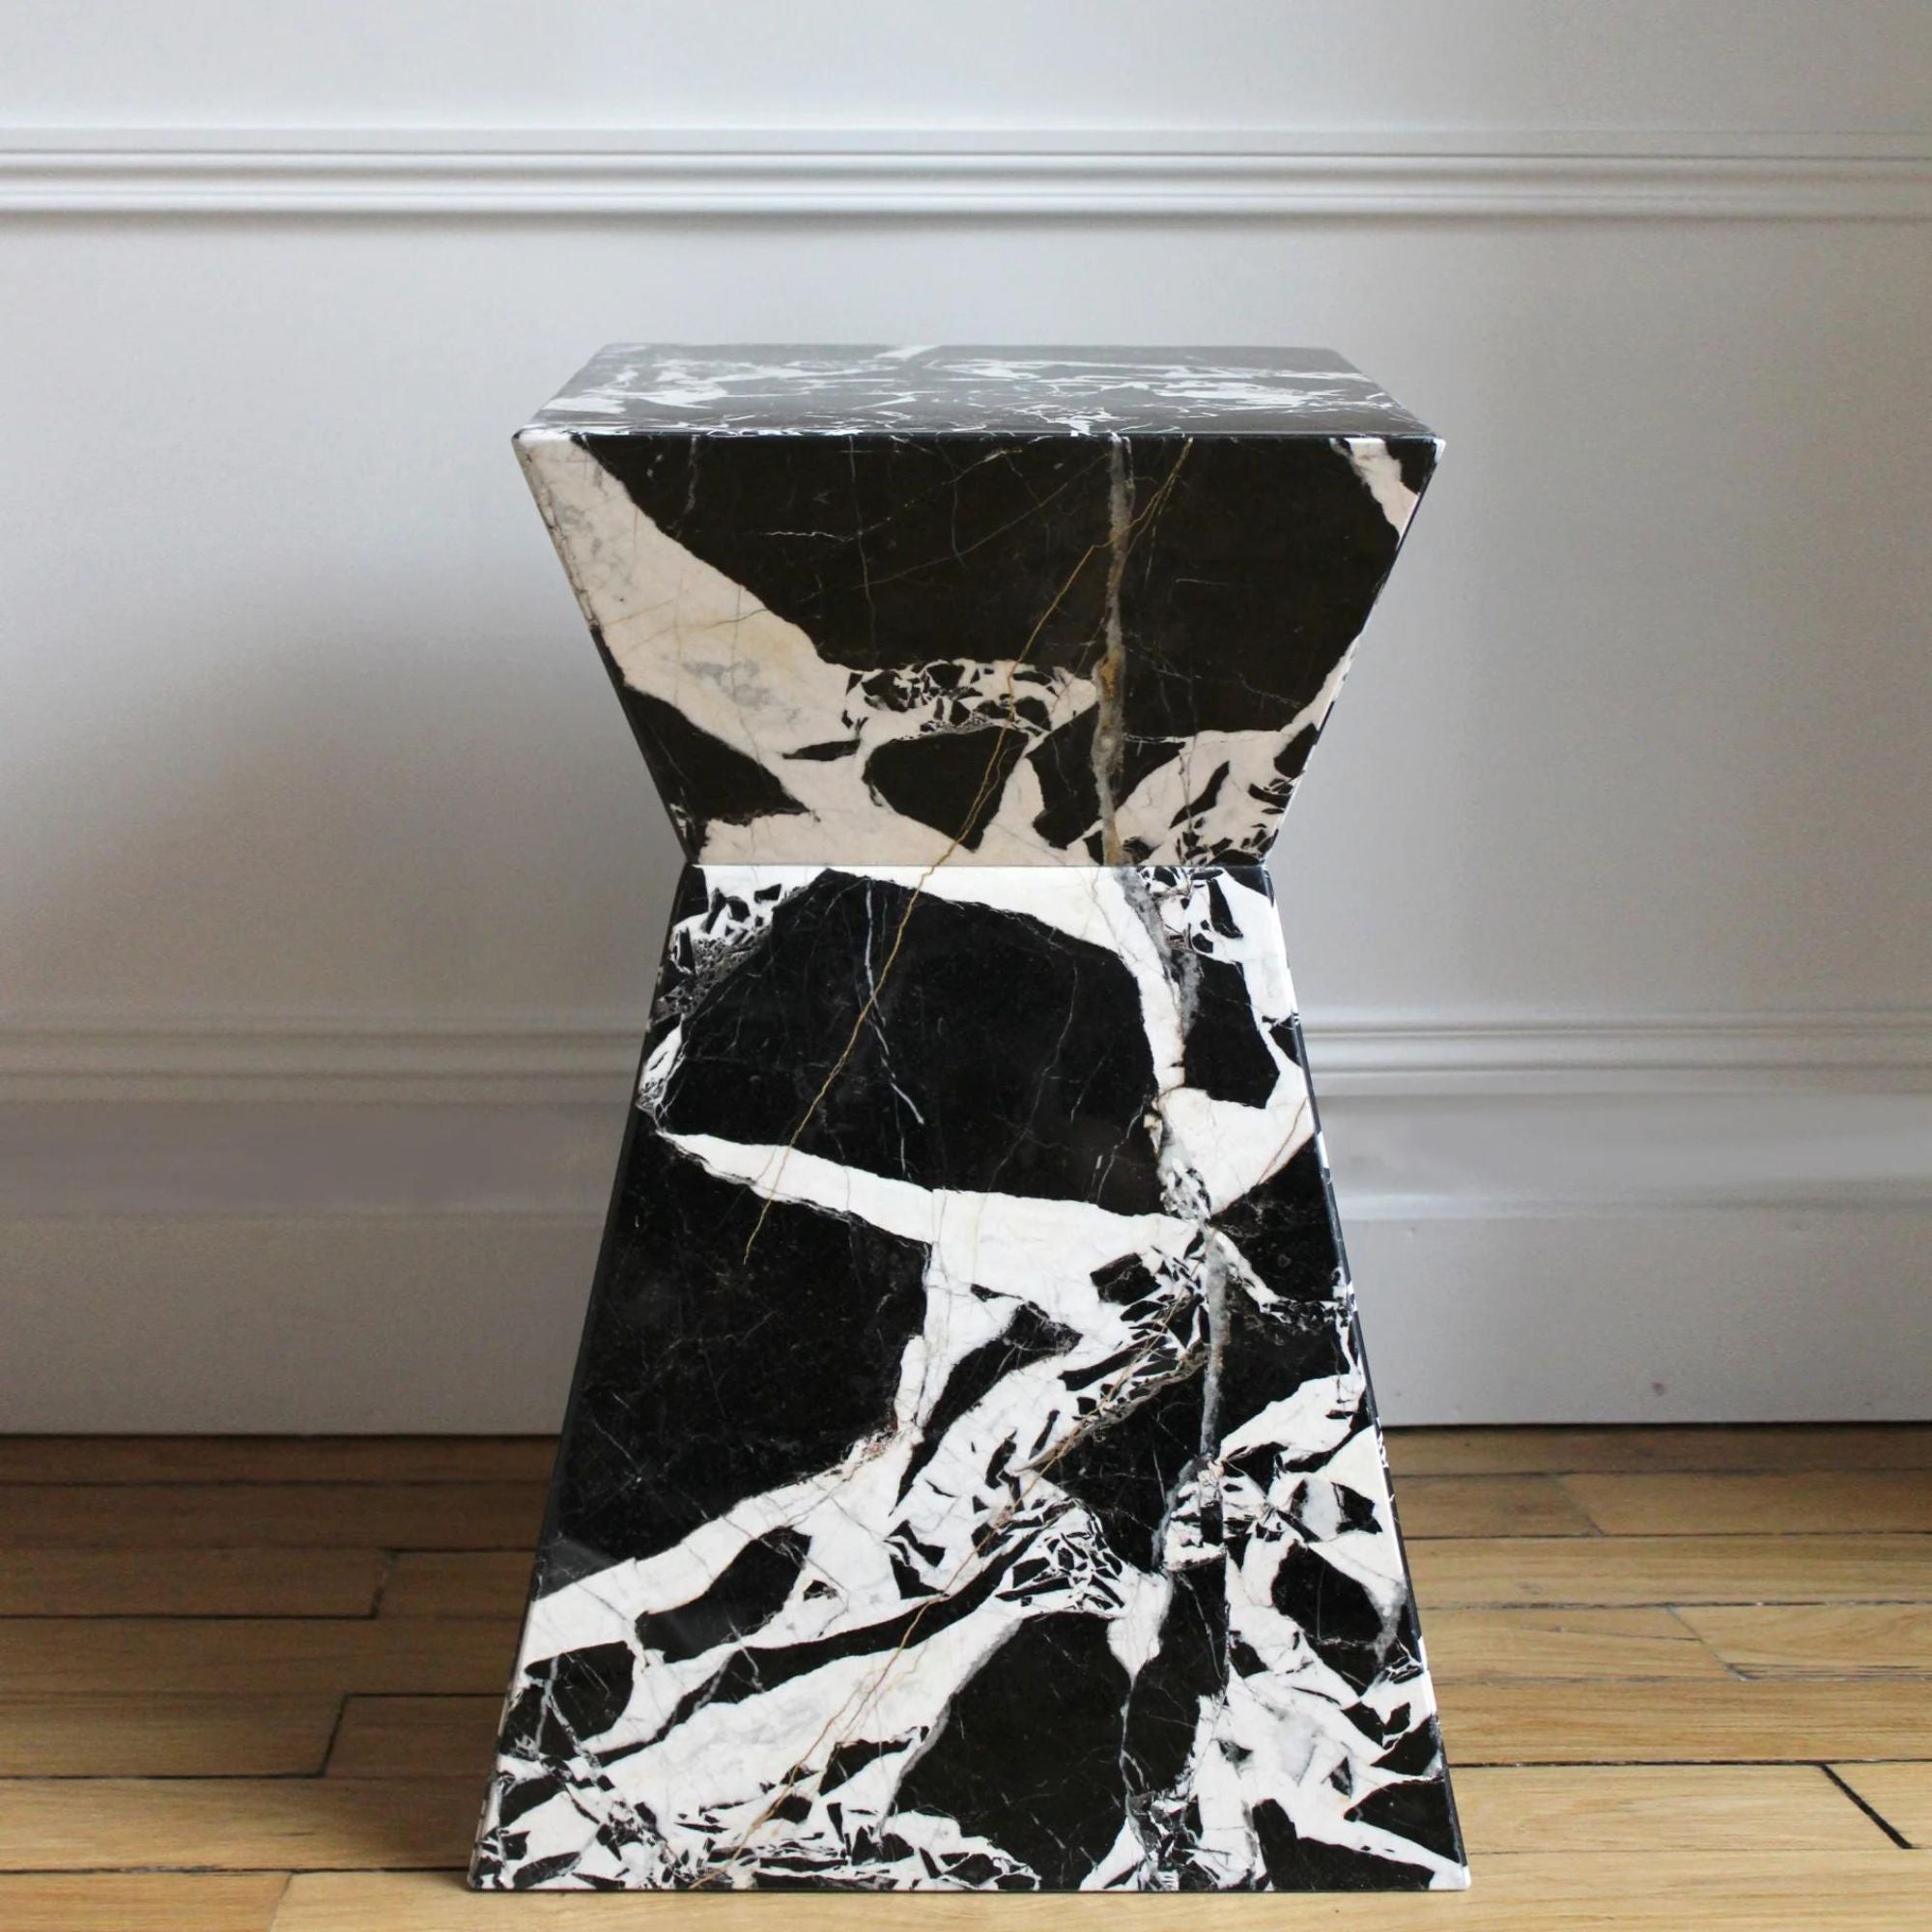 Aria Grand Antique Marble Table - THAT COOL LIVING